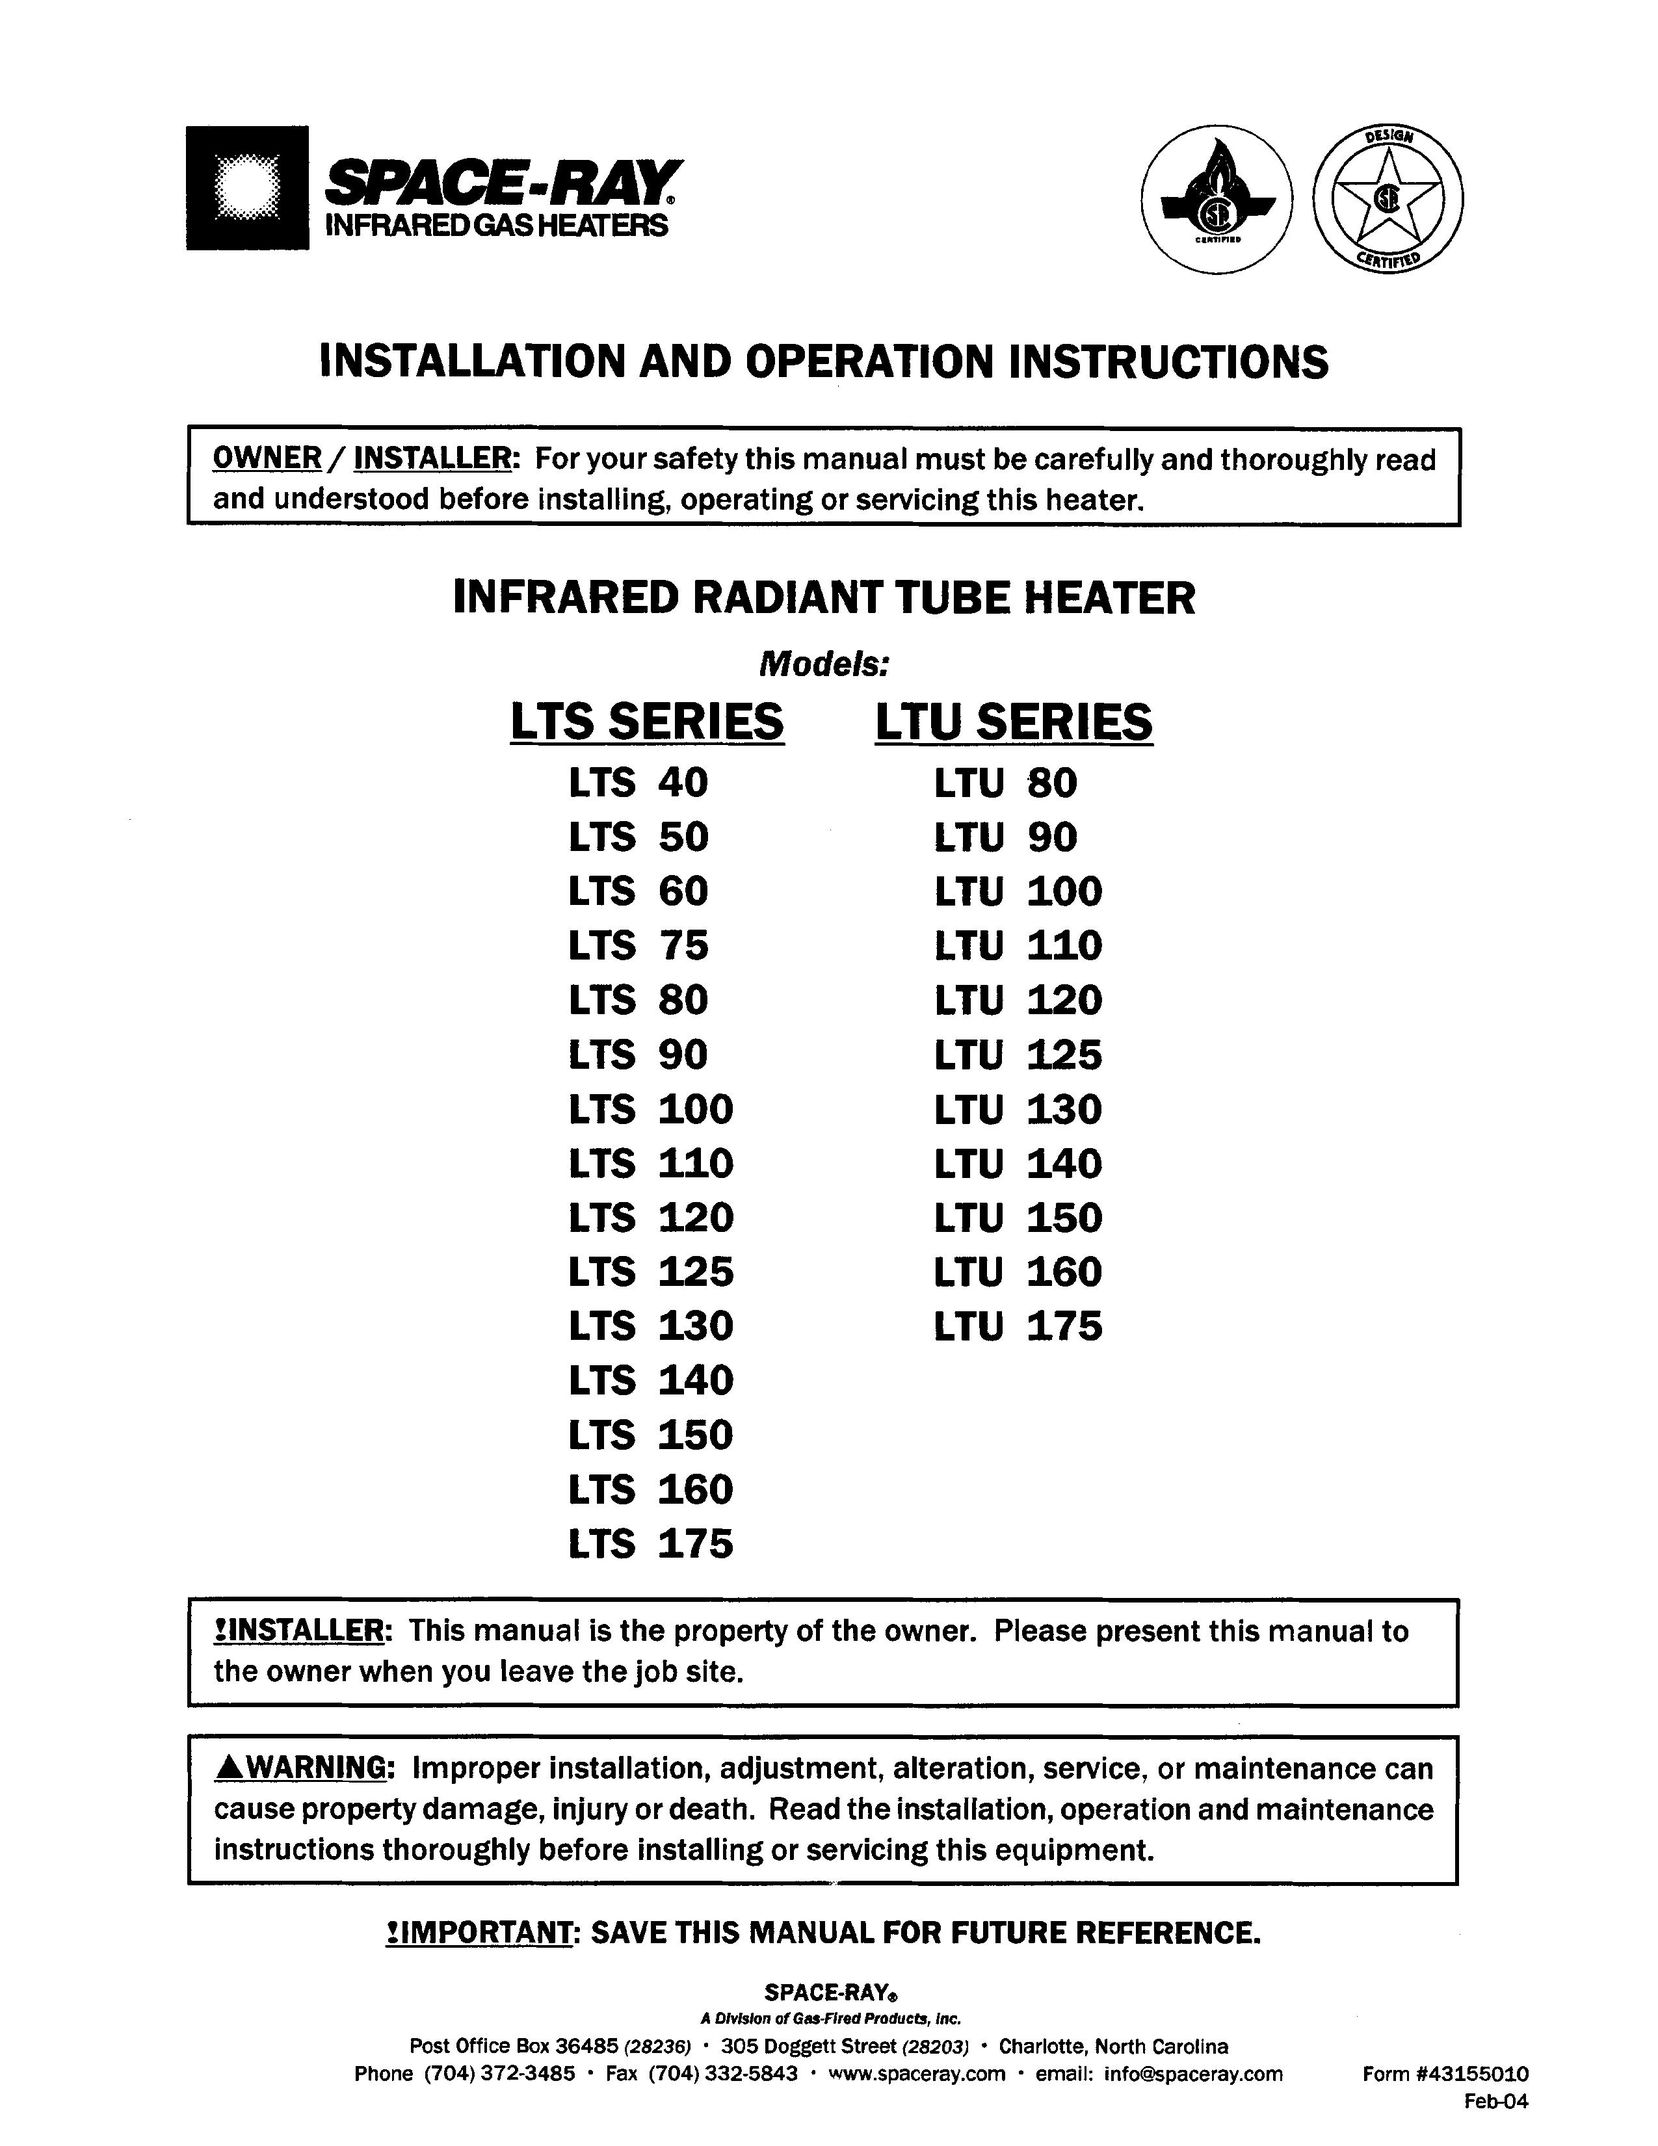 Gas-Fired Products LTU 160 Electric Heater User Manual